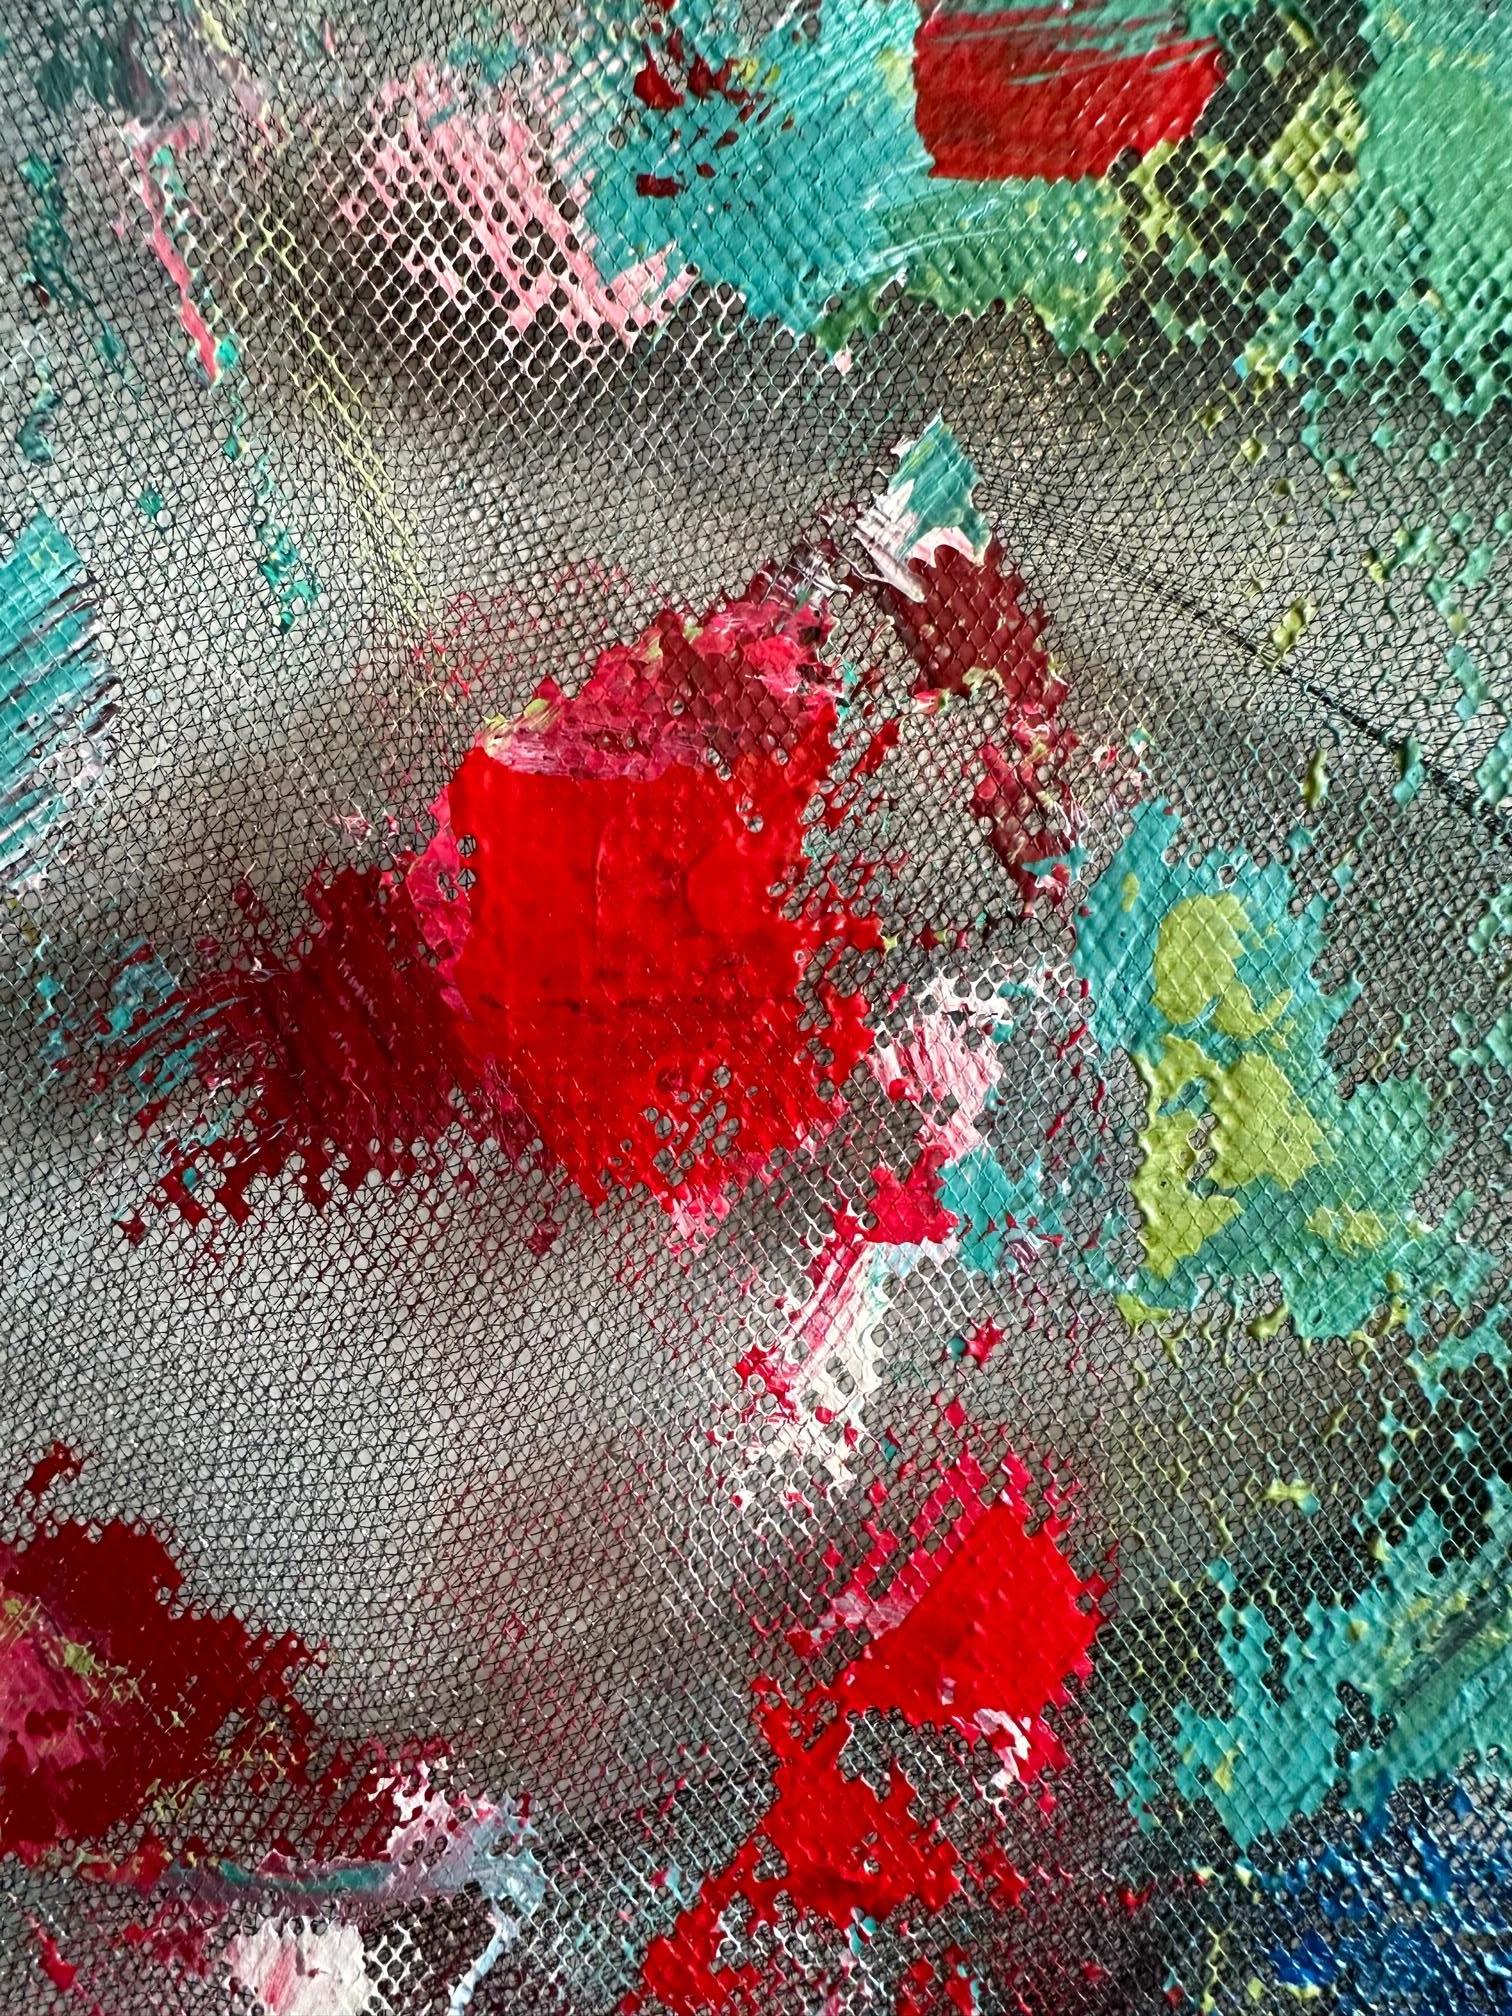 Motion - Oya Bolgun - Abstract Painting - Mixed Media For Sale 2